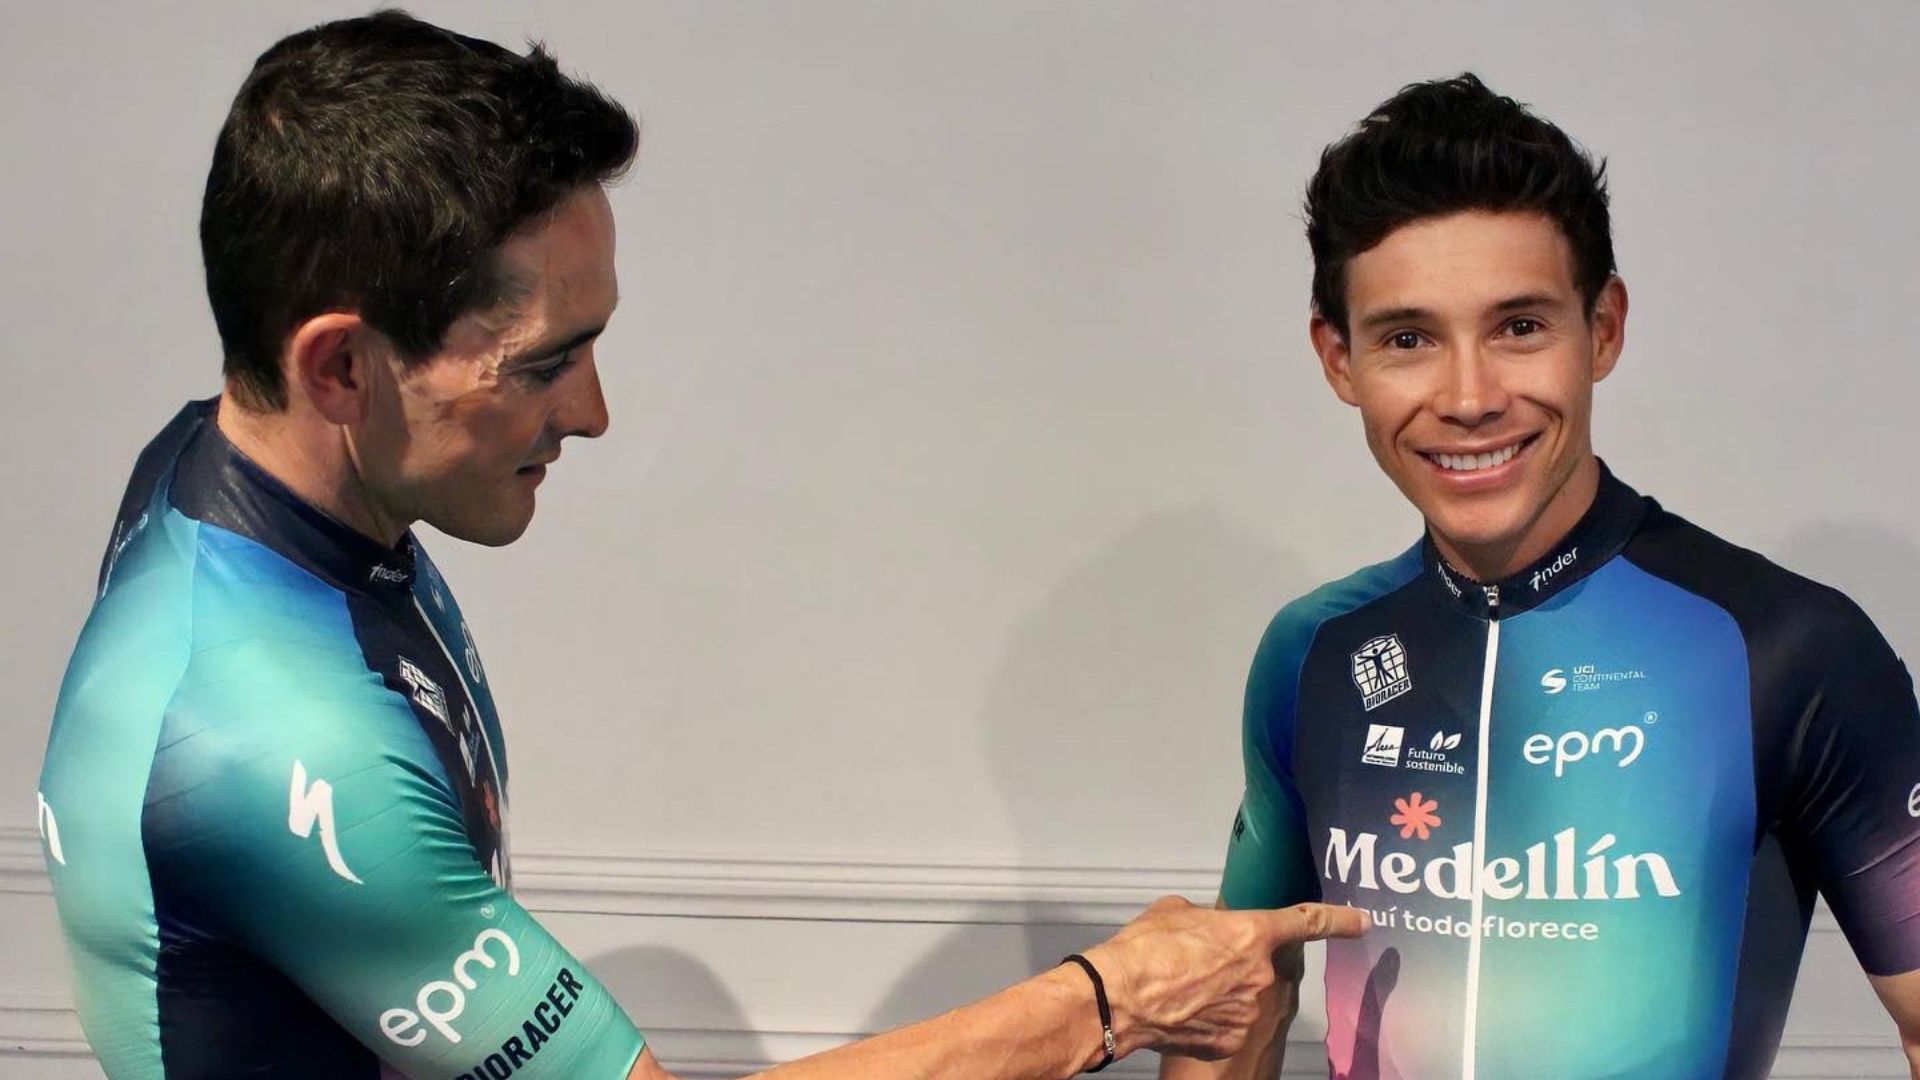 The Colombian cyclist spoke about his departure from Astana, a team with which he will meet again in the Vuelta a San Juan.  @team_medellin - Twitter